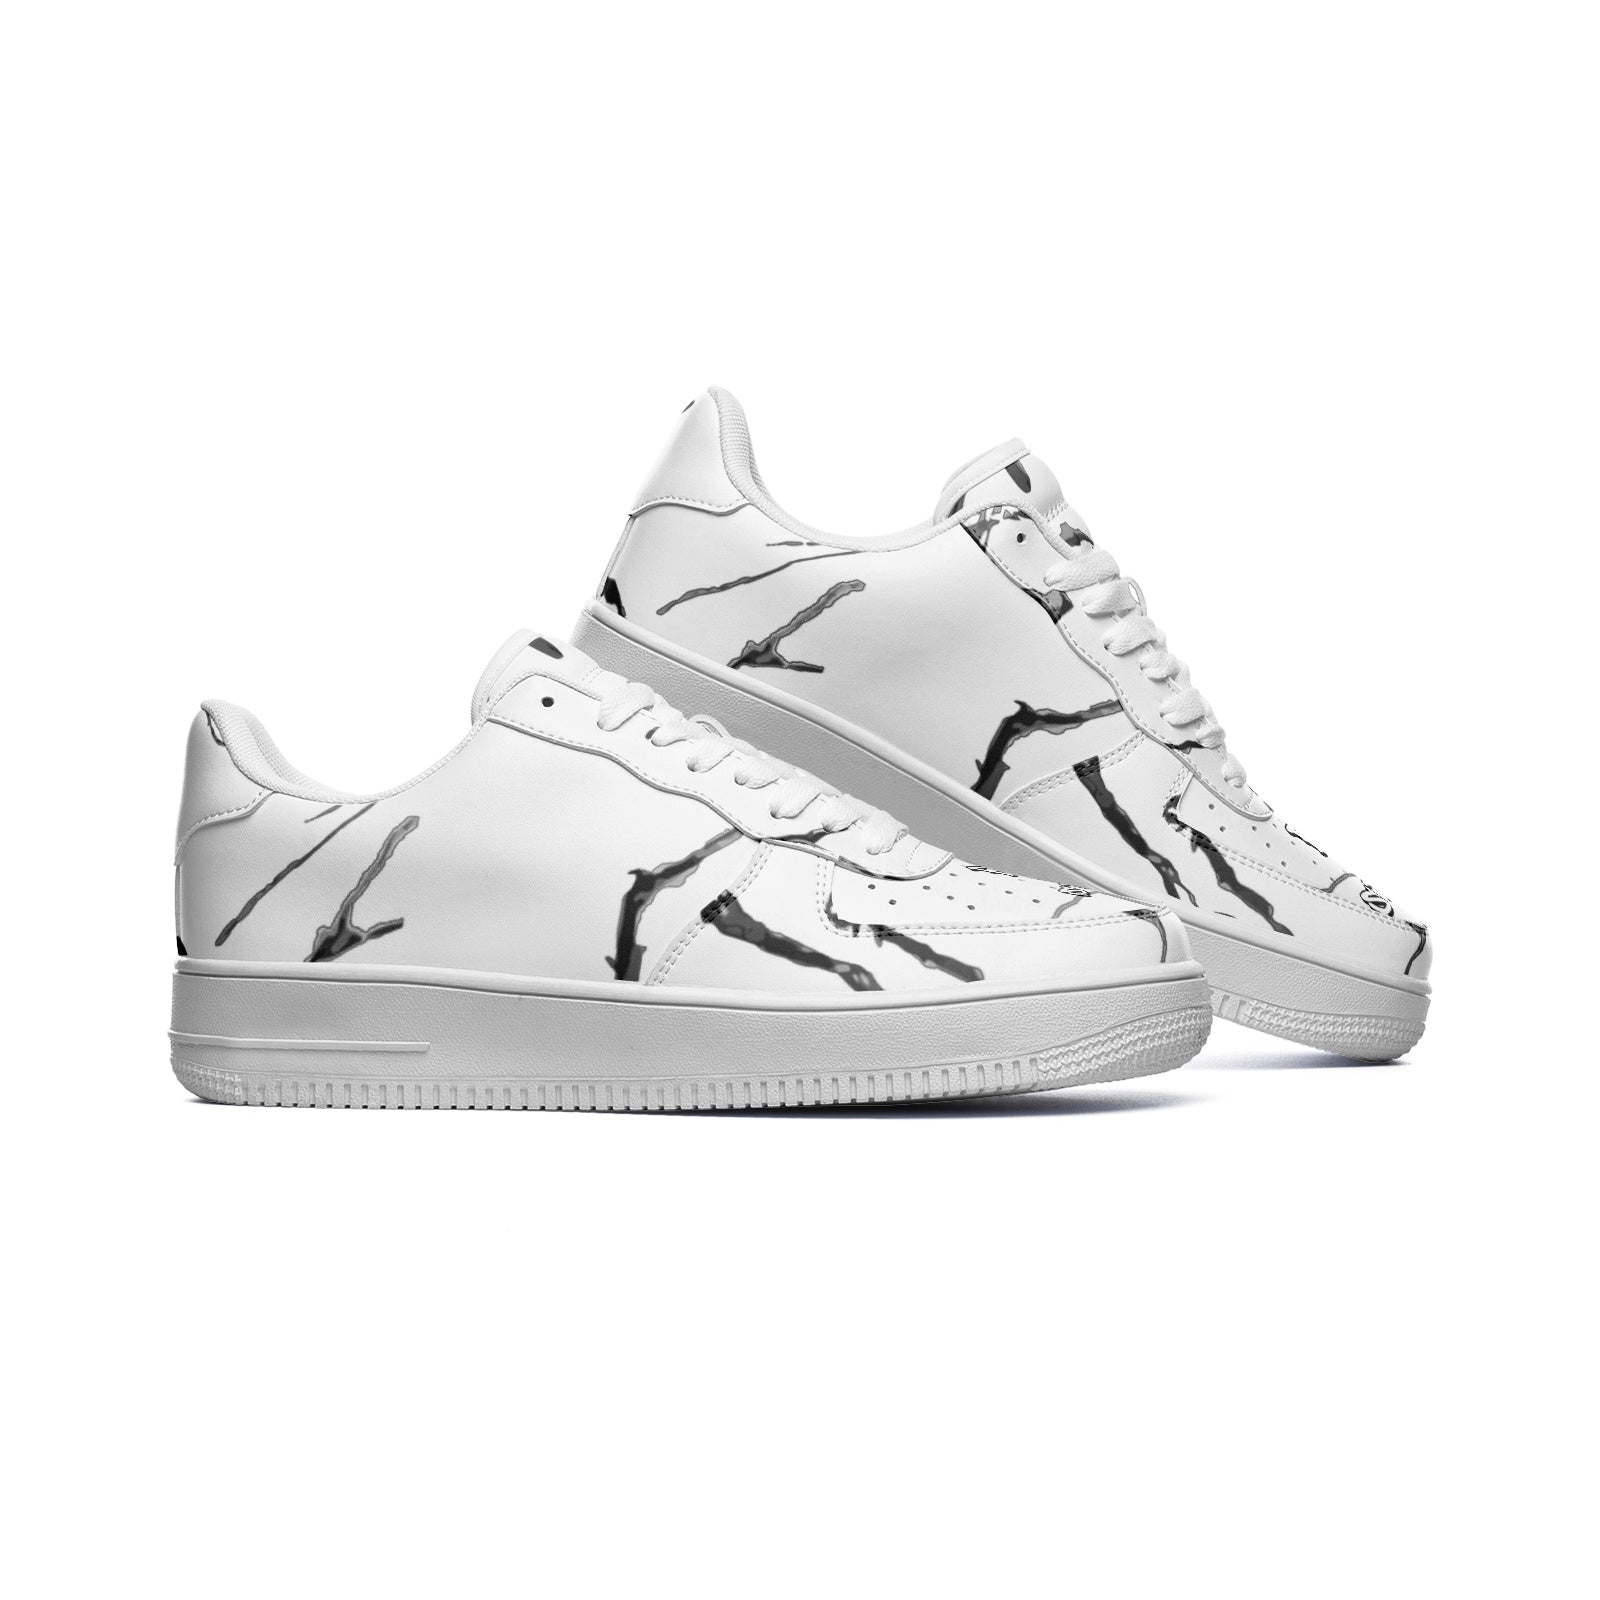 Unisex Low Top Leather Sneakers